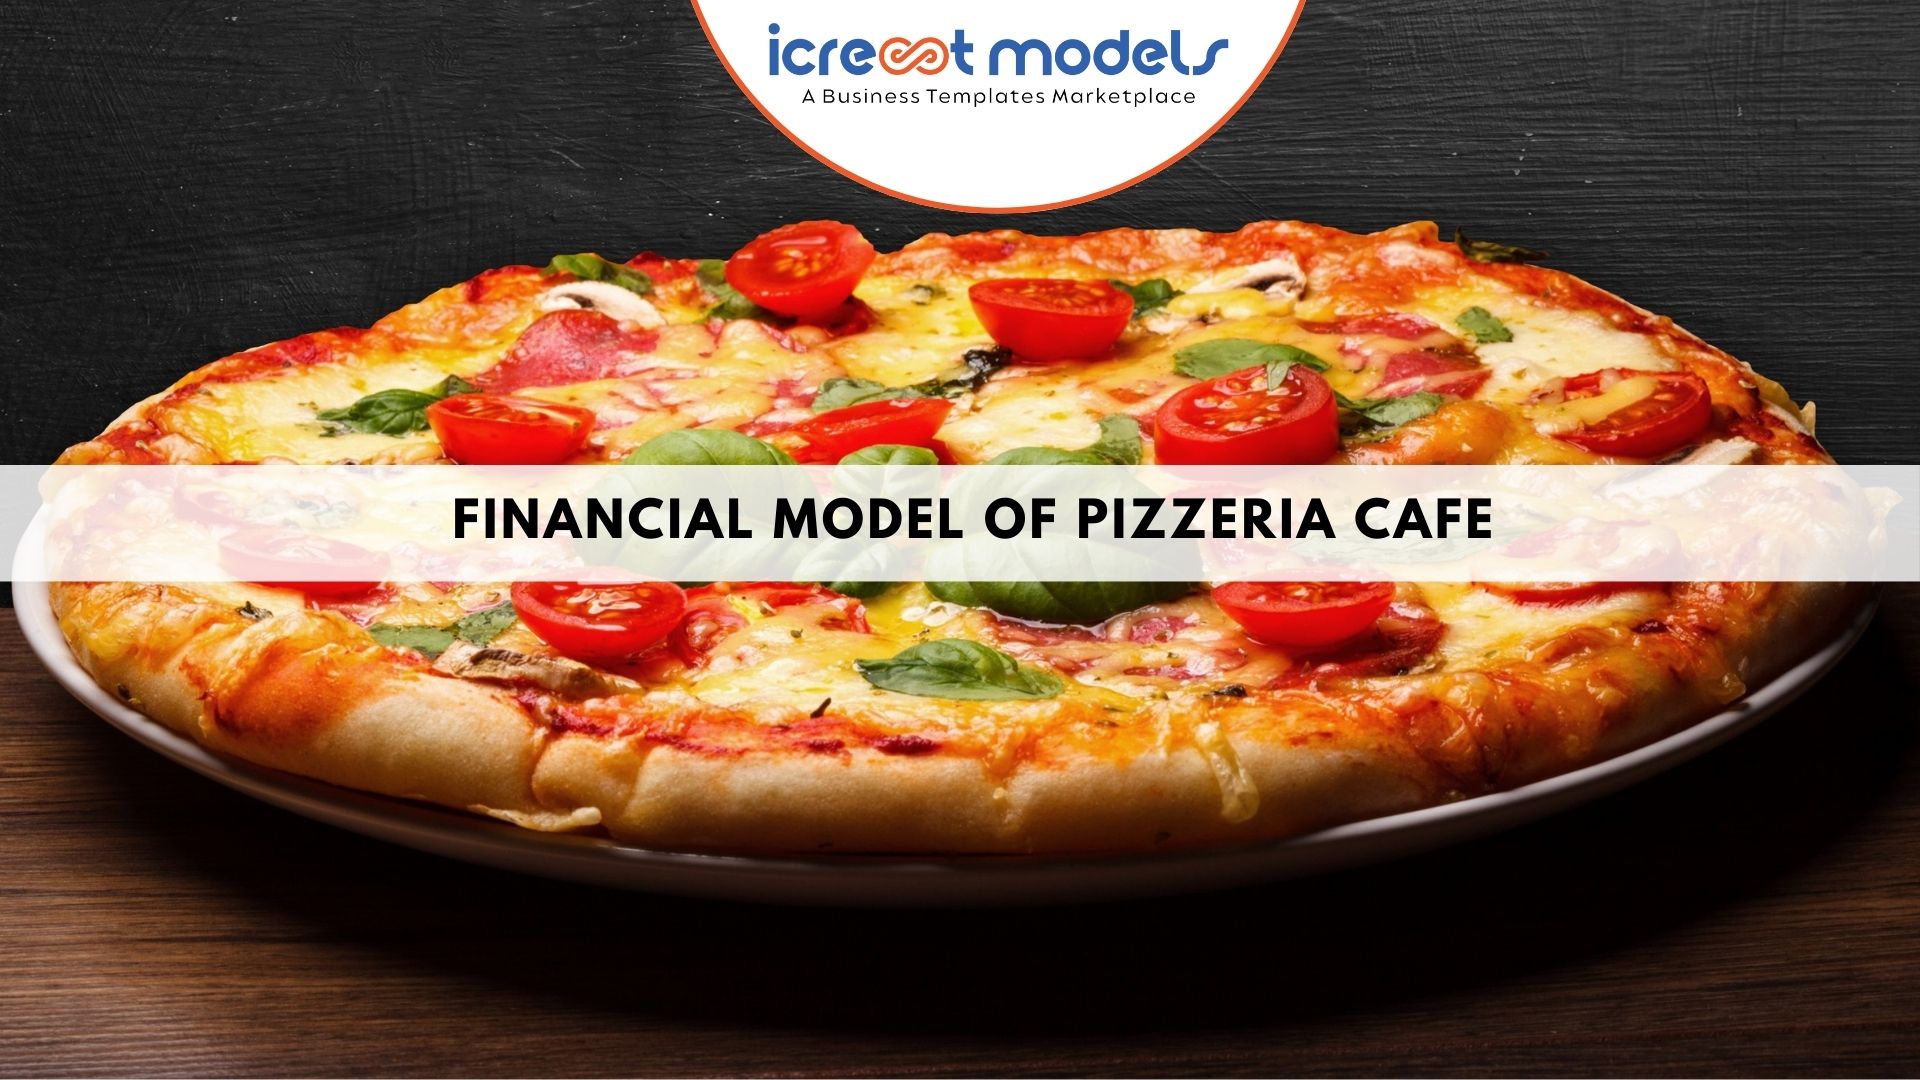 Financial Model of Pizzeria Cafe